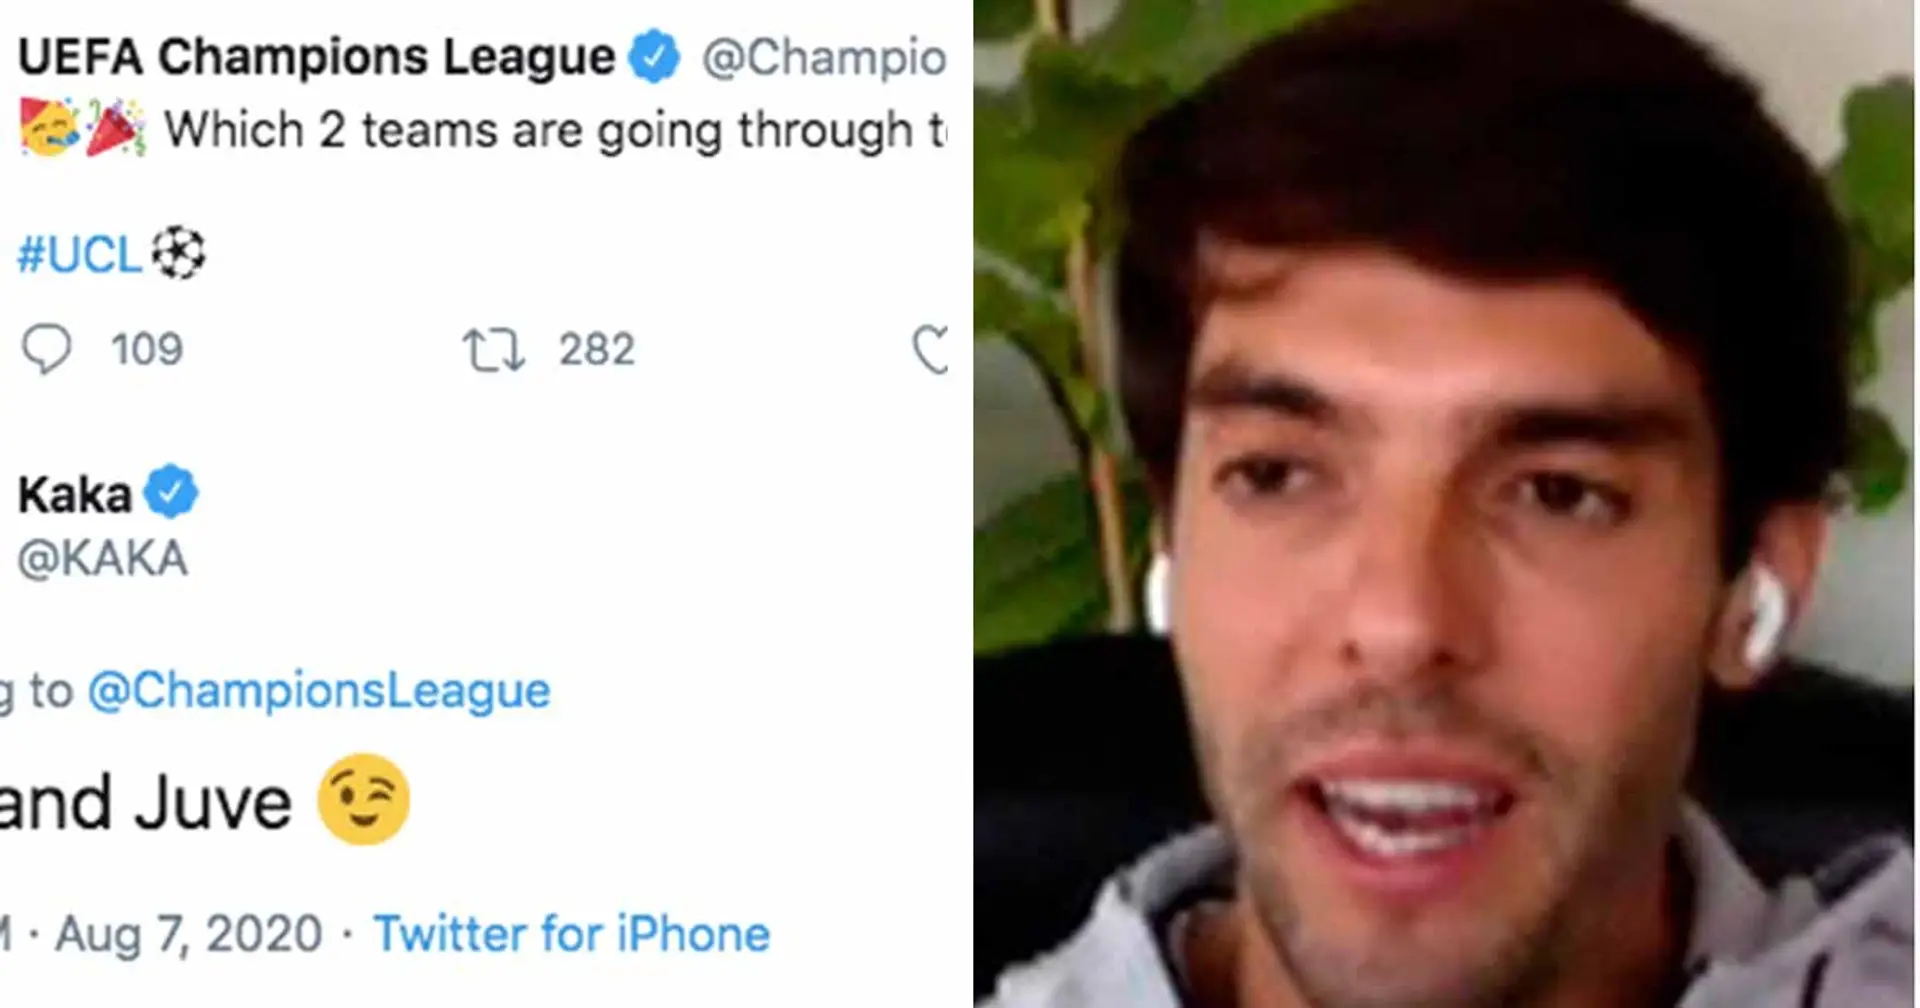 Kaka comes up with arguably worst prediction ever when asked about first CL quarterfinalists